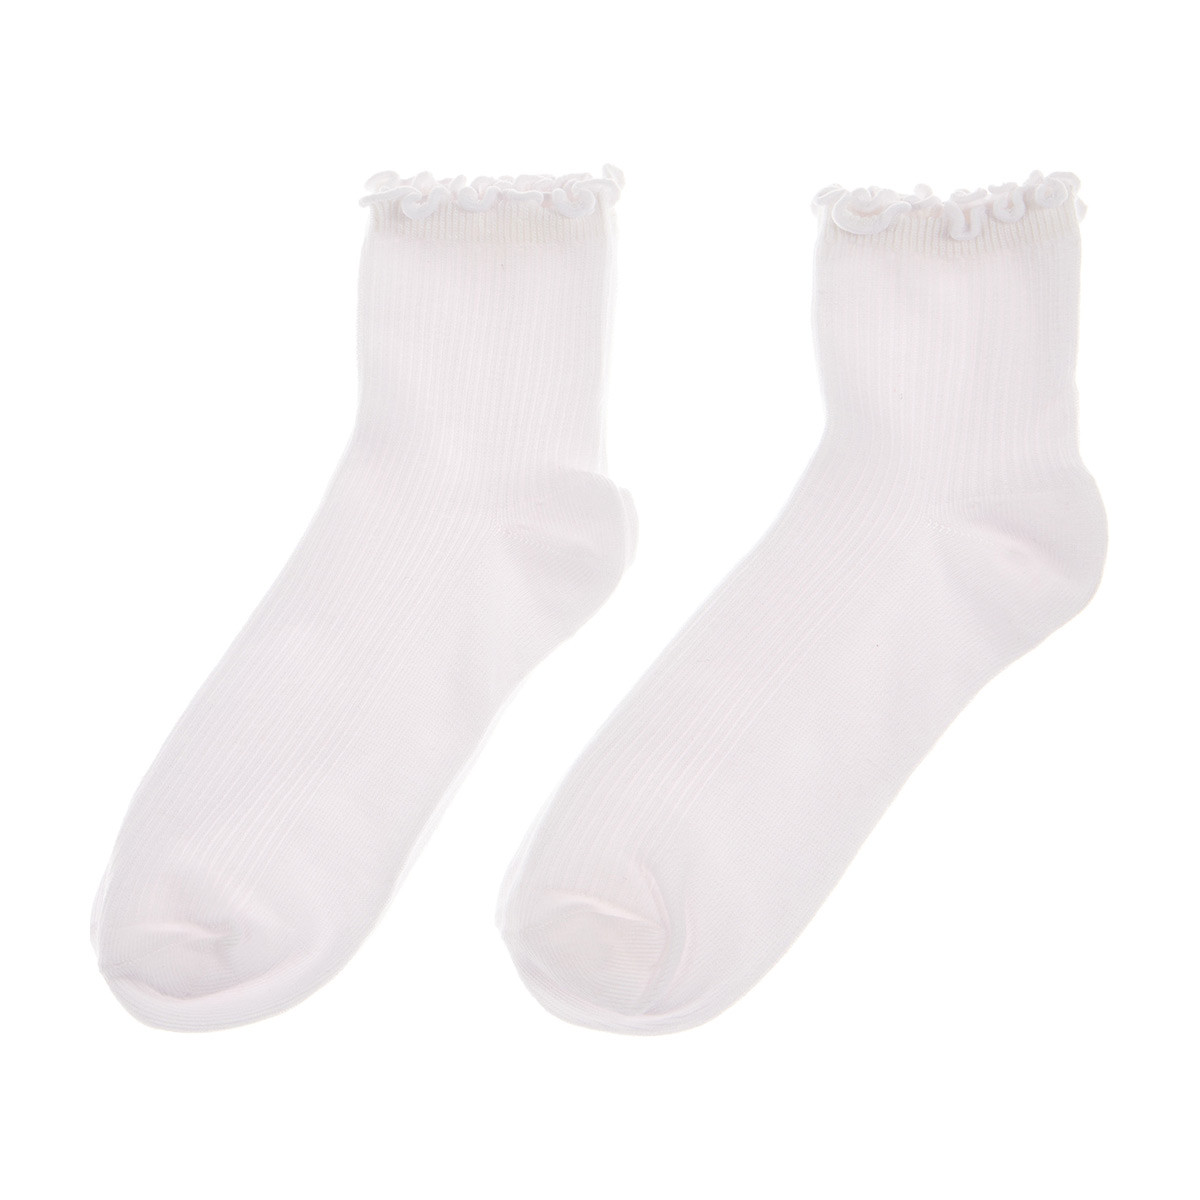 Poly Cotton Blend Crew Socks with Trim Detail